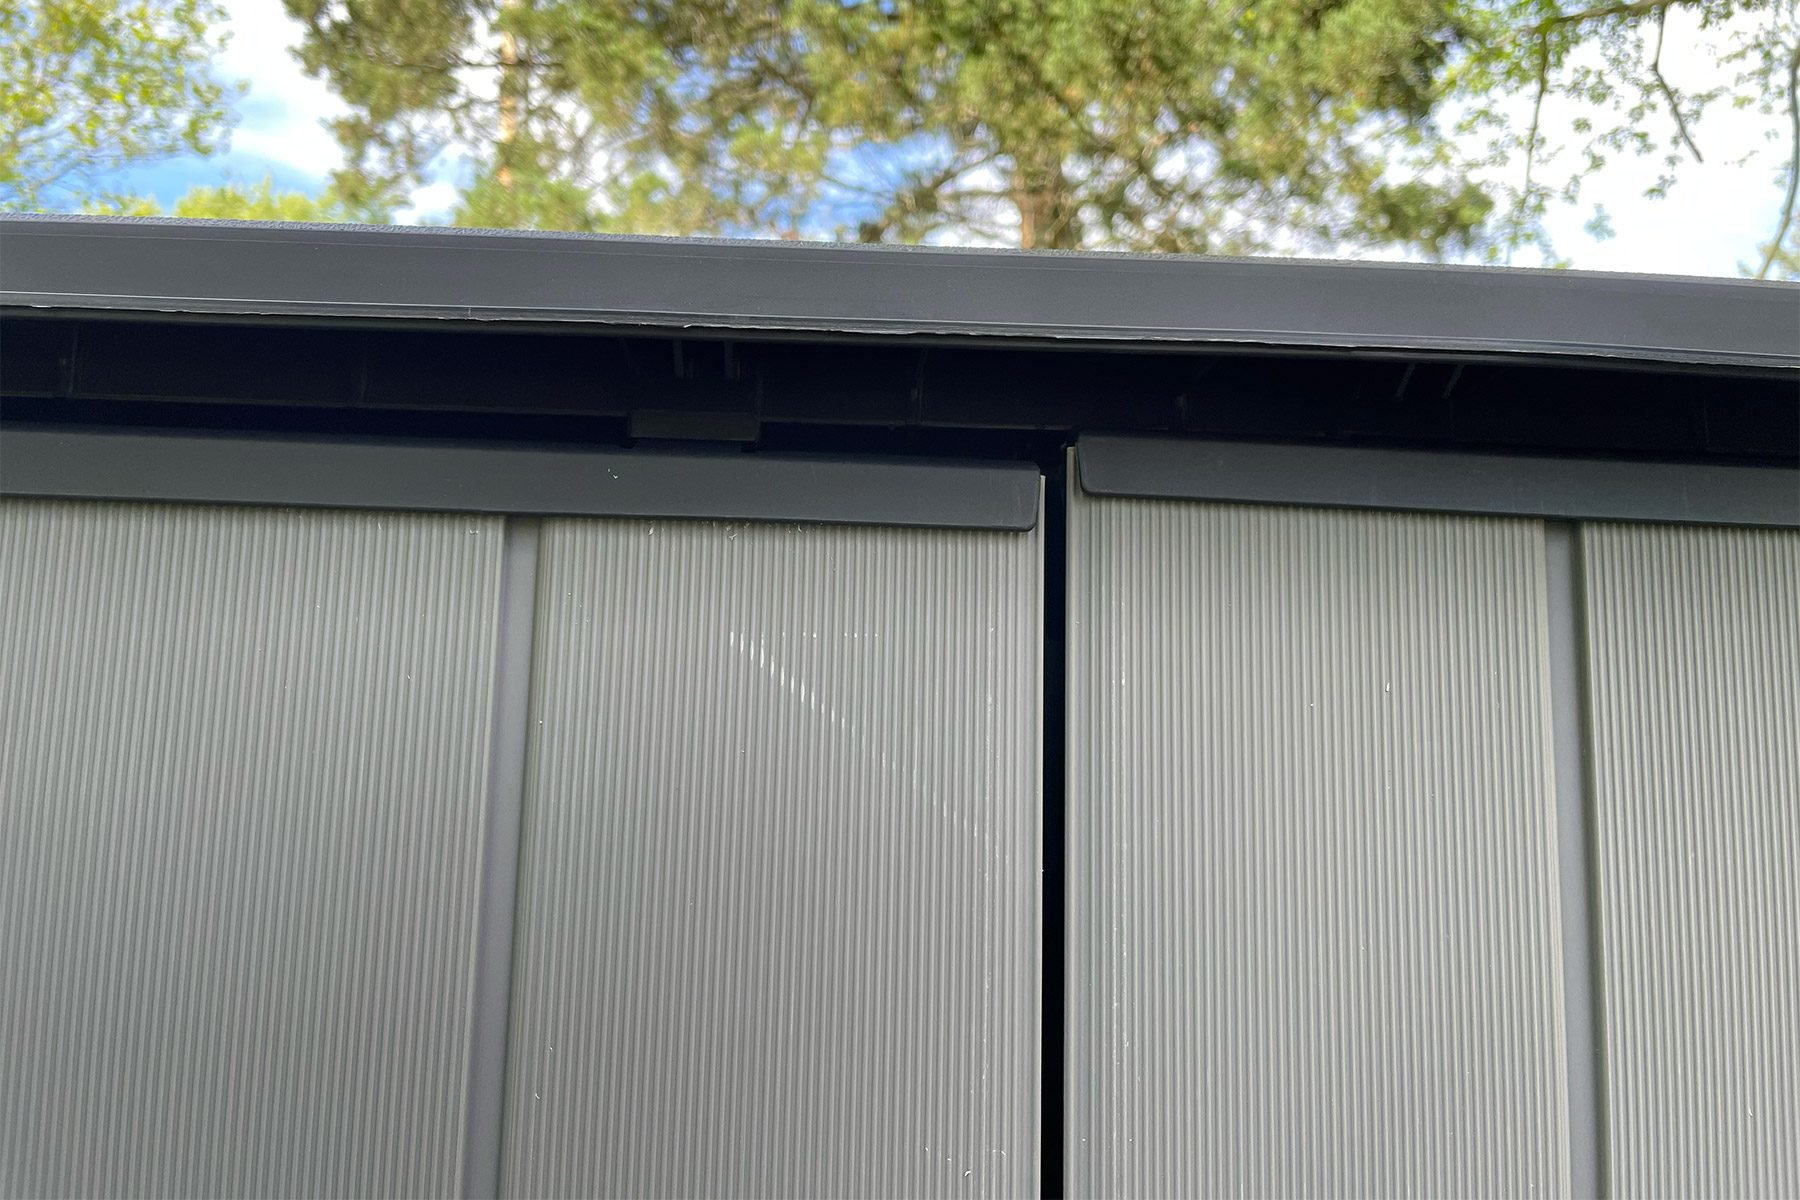 Keter Shed roof